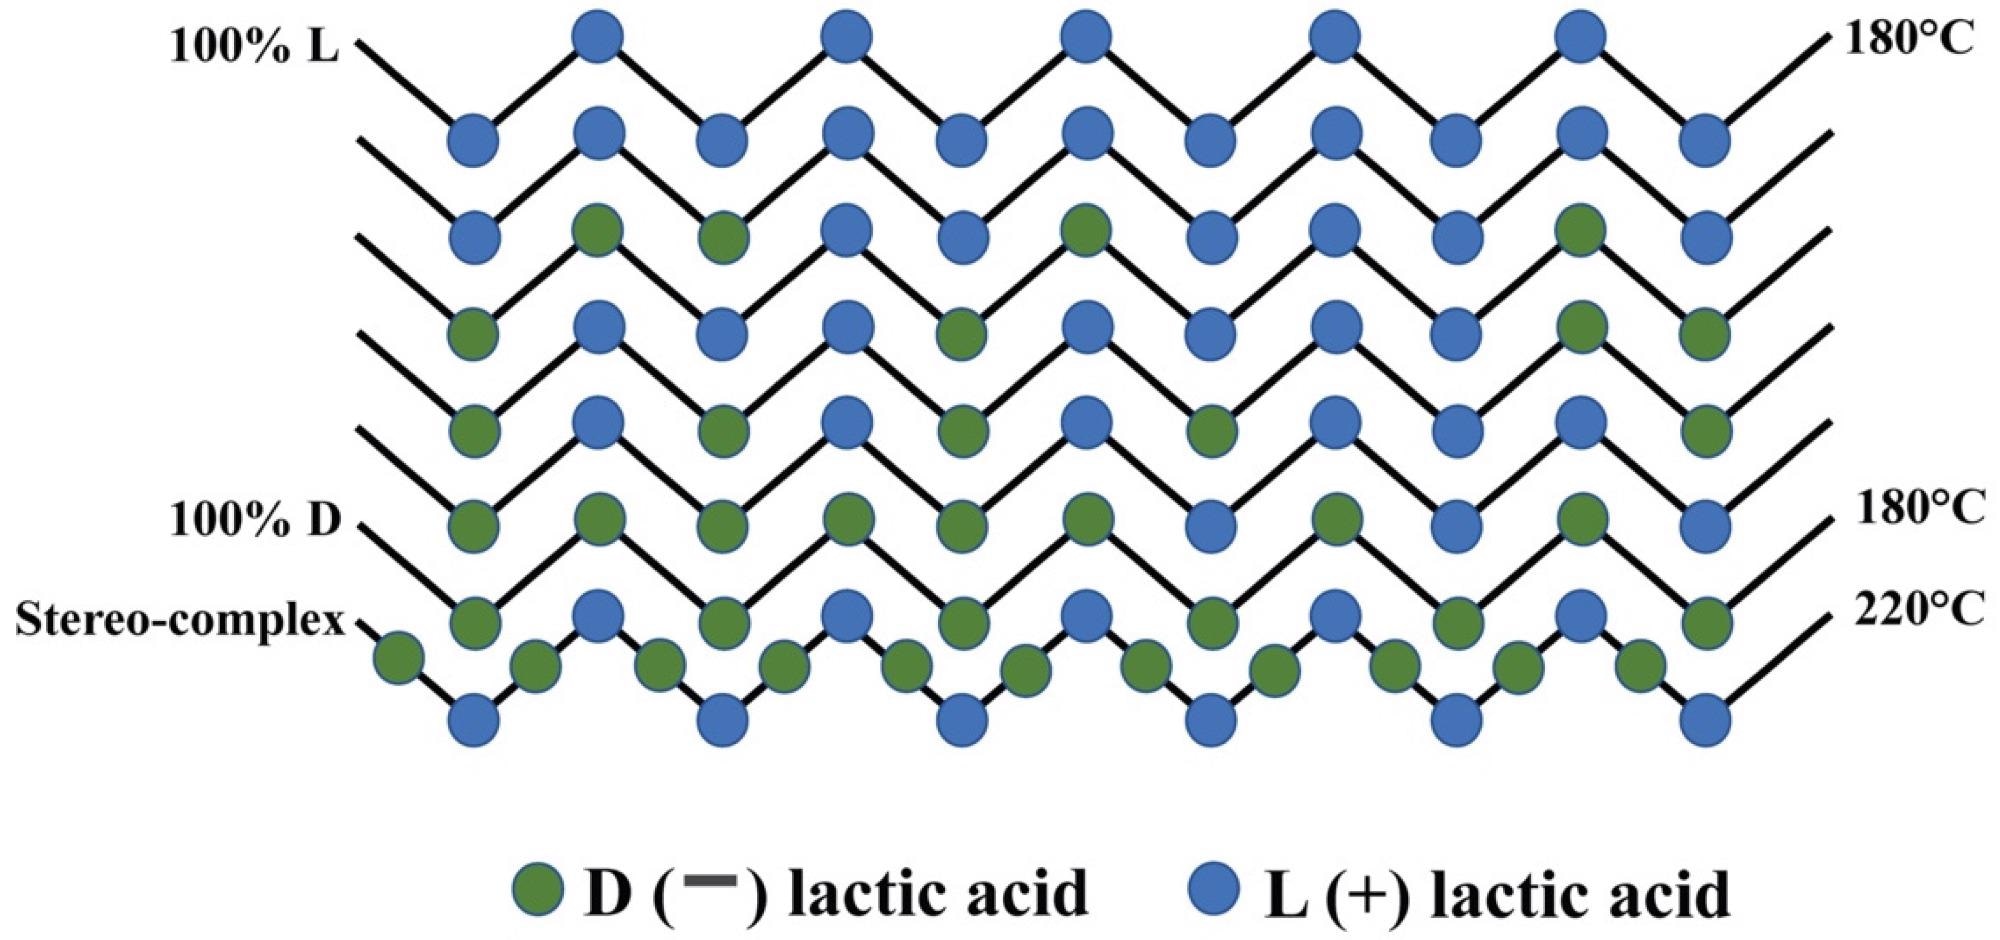 Examples of molecular configurations of PLA obtained through combining the two lactic acids.